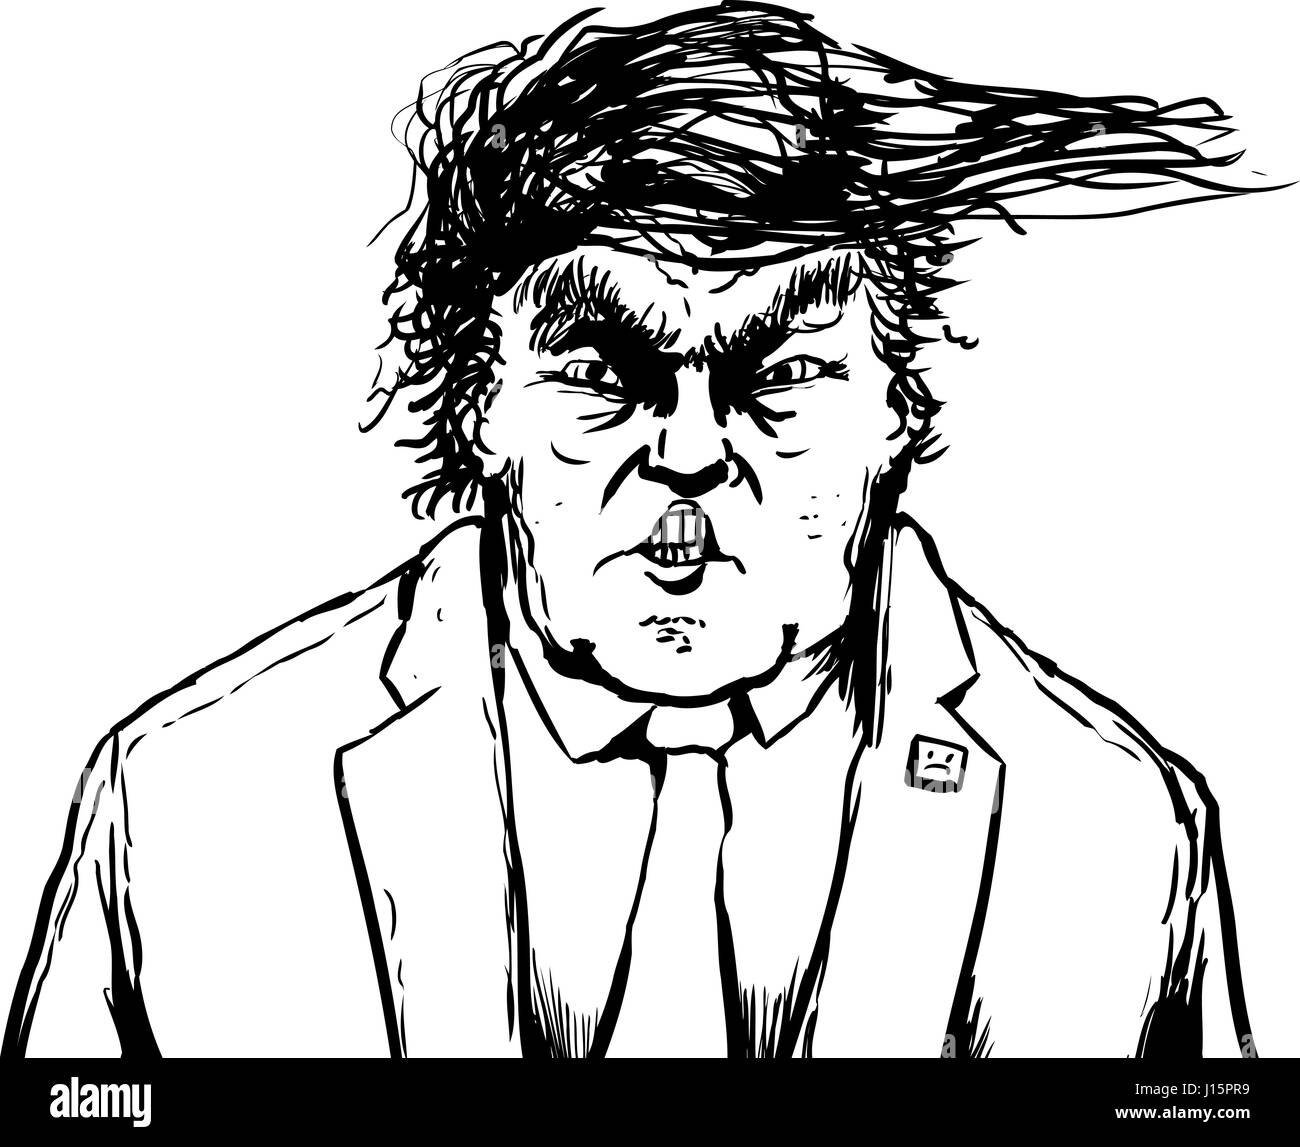 April 18, 2017. Outlined caricature of Donald Trump with clenched teeth and hairdo blowing sideways Stock Photo